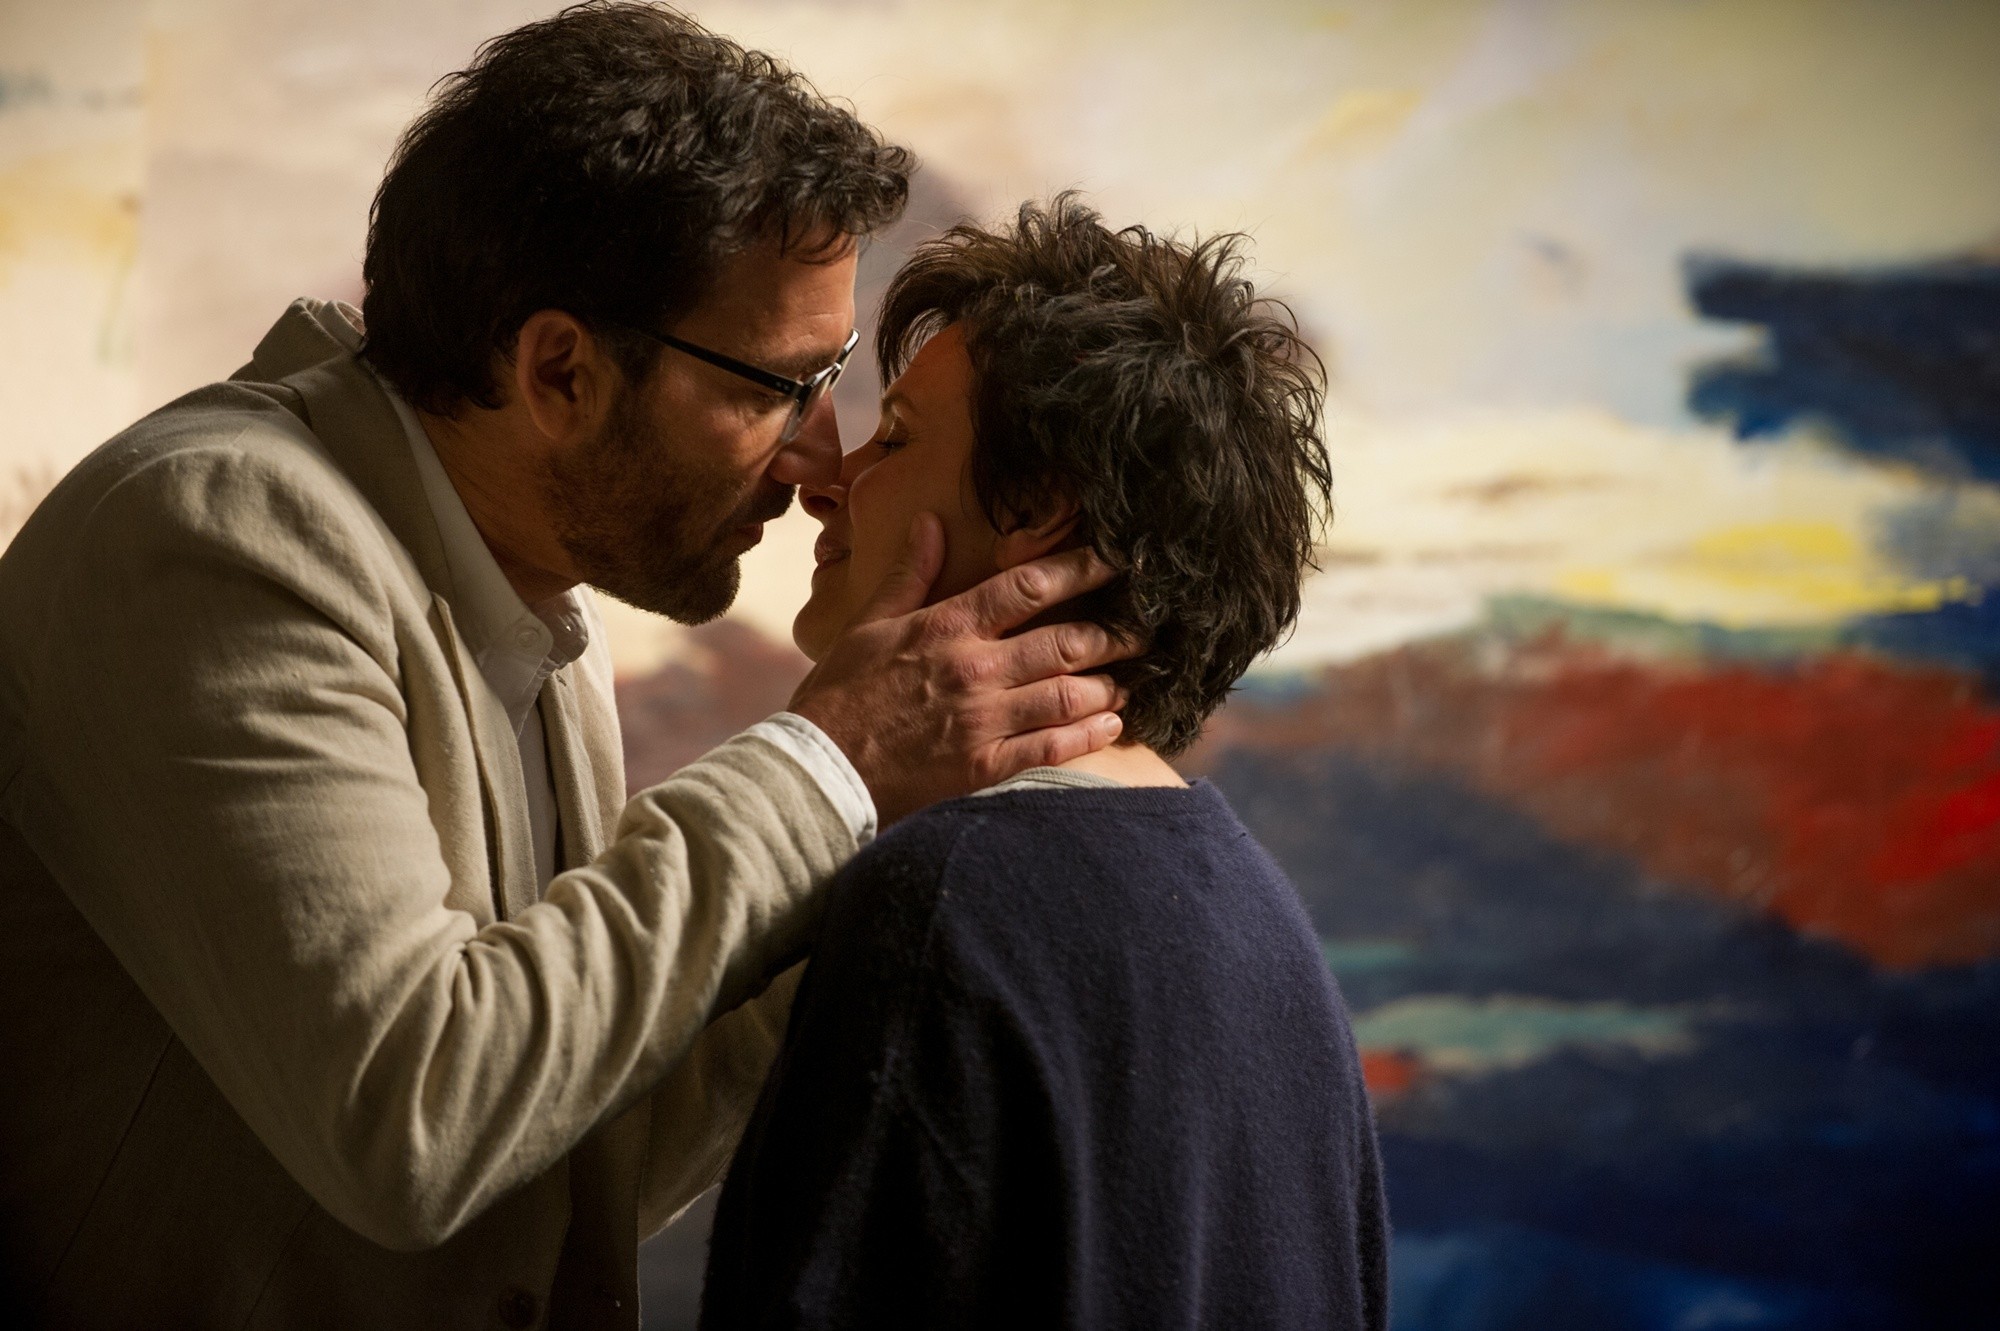 Clive Owen stars as Jack Marcus and Juliette Binoche stars as Dina Delsanto in Roadside Attractions' Words and Pictures (2014)